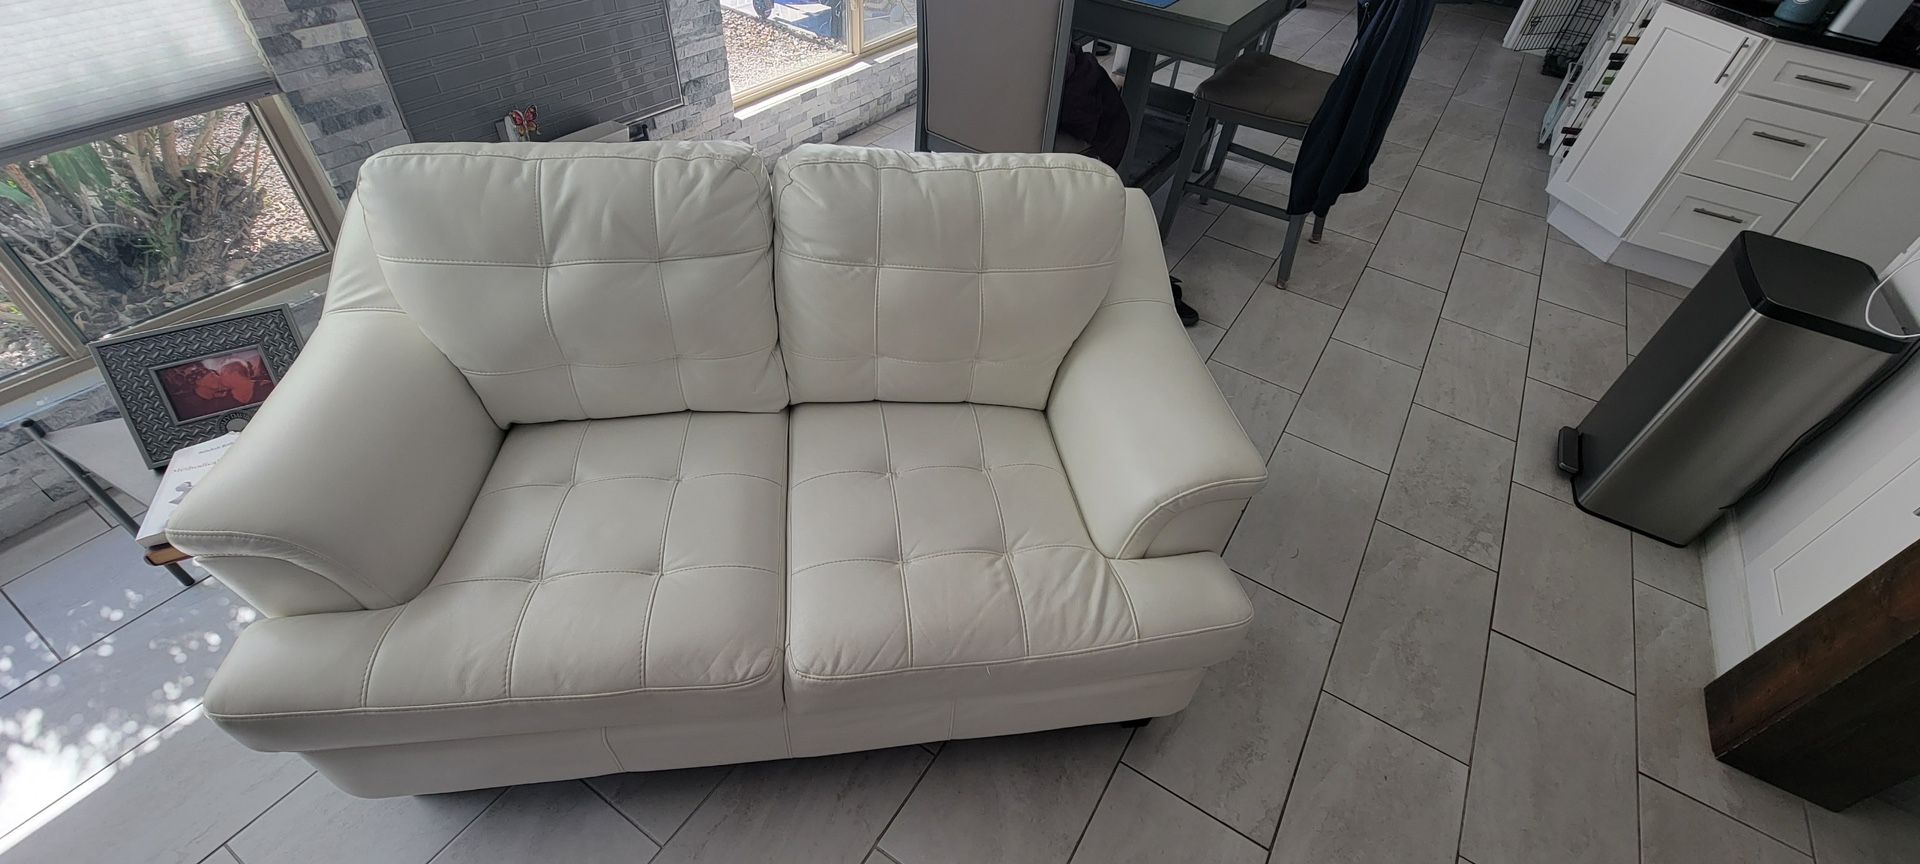 PRICE REDUCED! White Leather Couch 